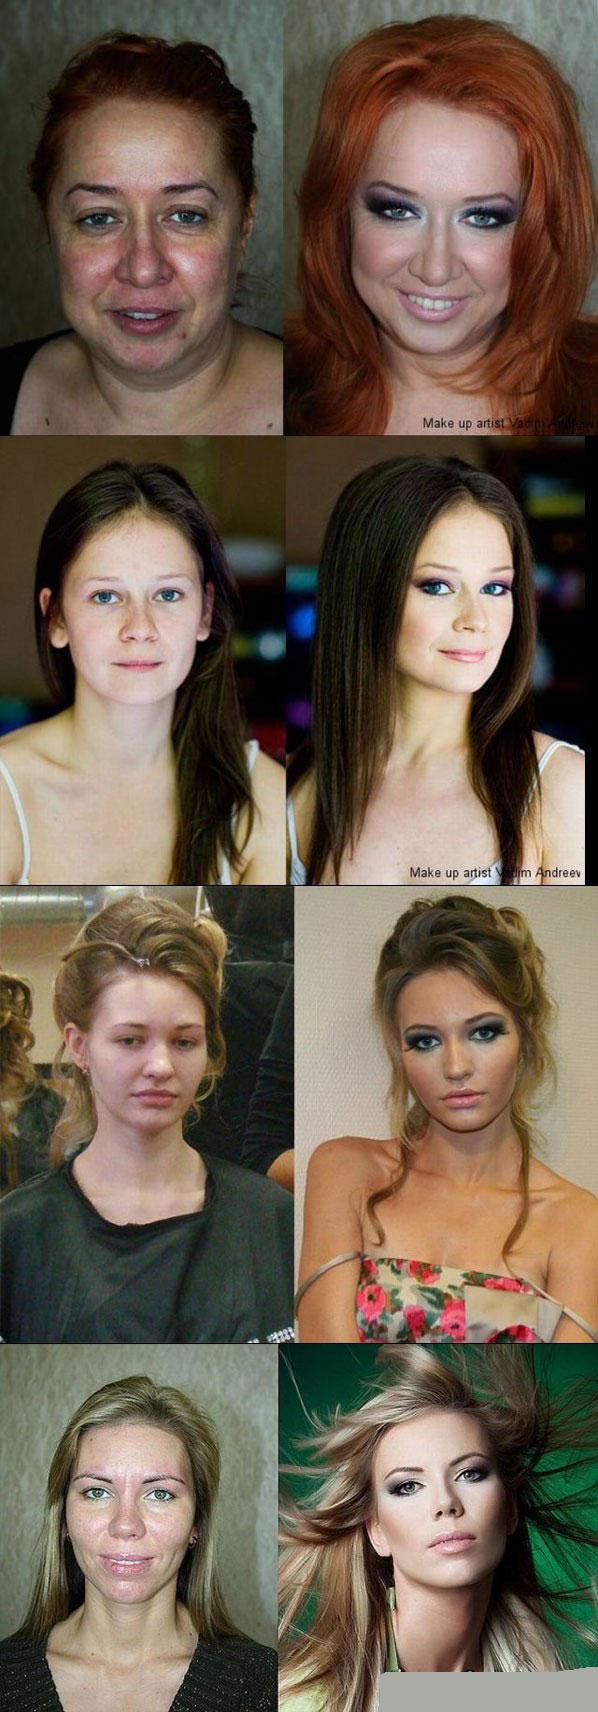 Some women are blessed with a good makeup artist.